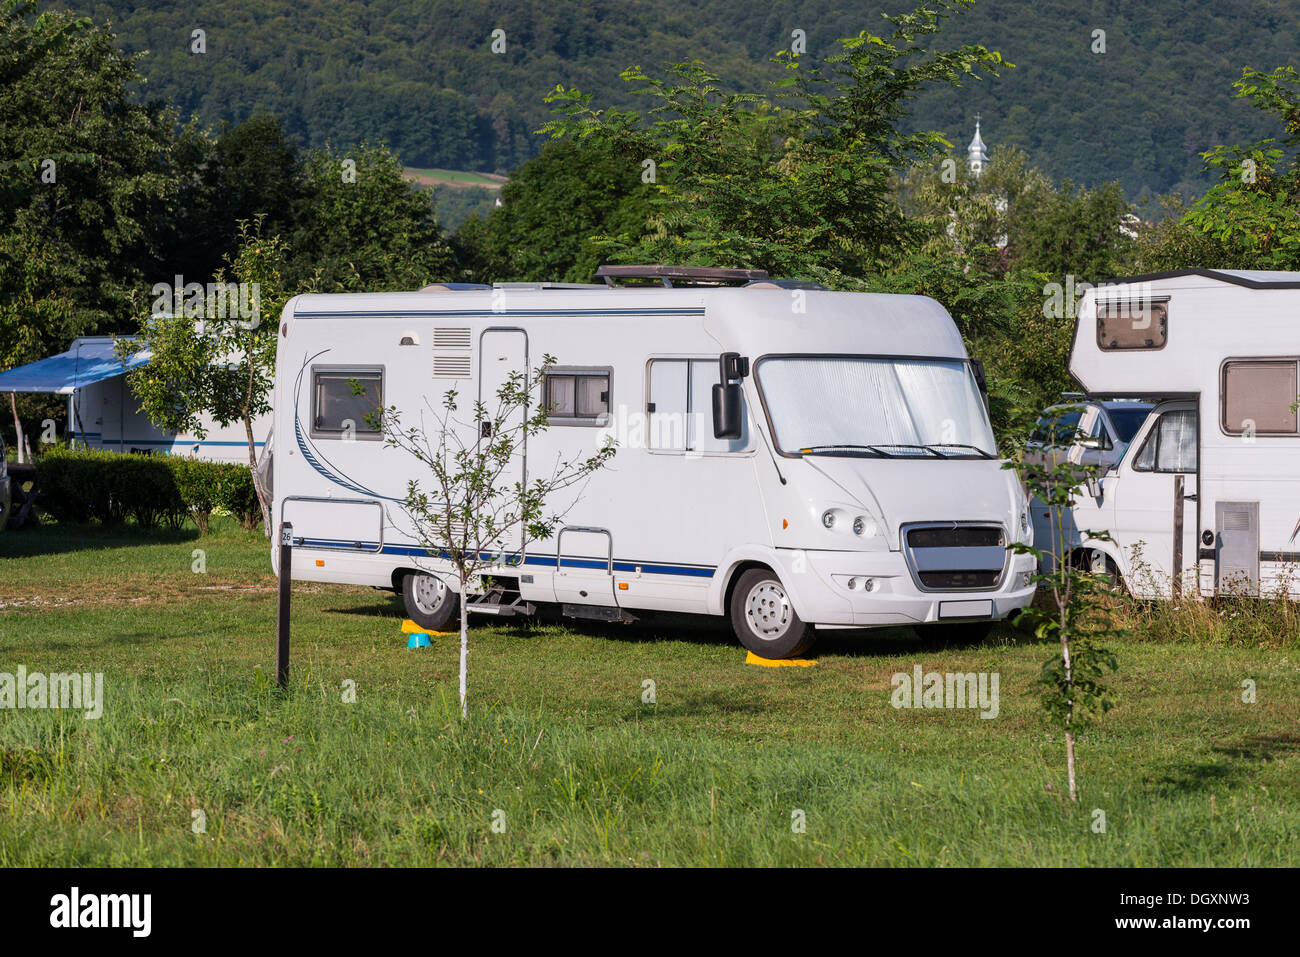 Mobile Home; Camping; Vehicle Trailer; Car; Tent; Summer; Holiday; Vacations; Park; Travel Destinations; Field; Travel; Grass; Stock Photo